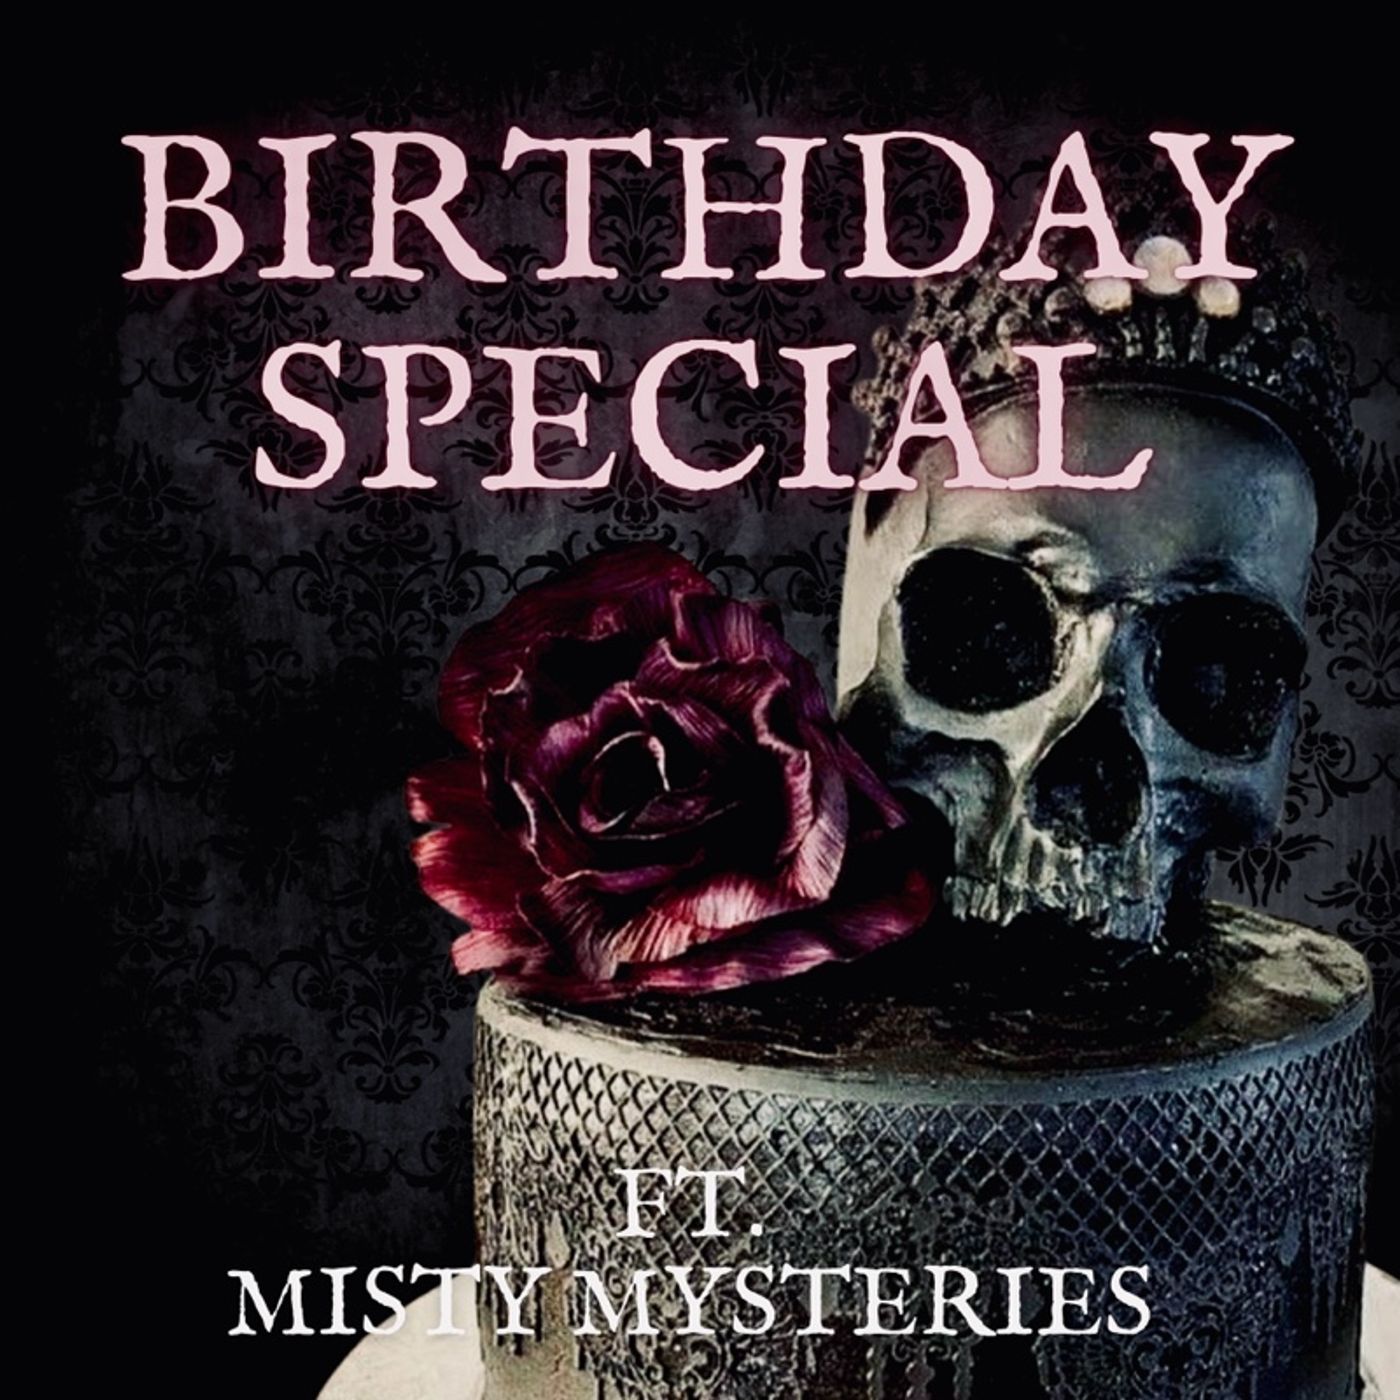 Birthday Special ft. Misty Mysteries - Hauntings of Inveraray Castle